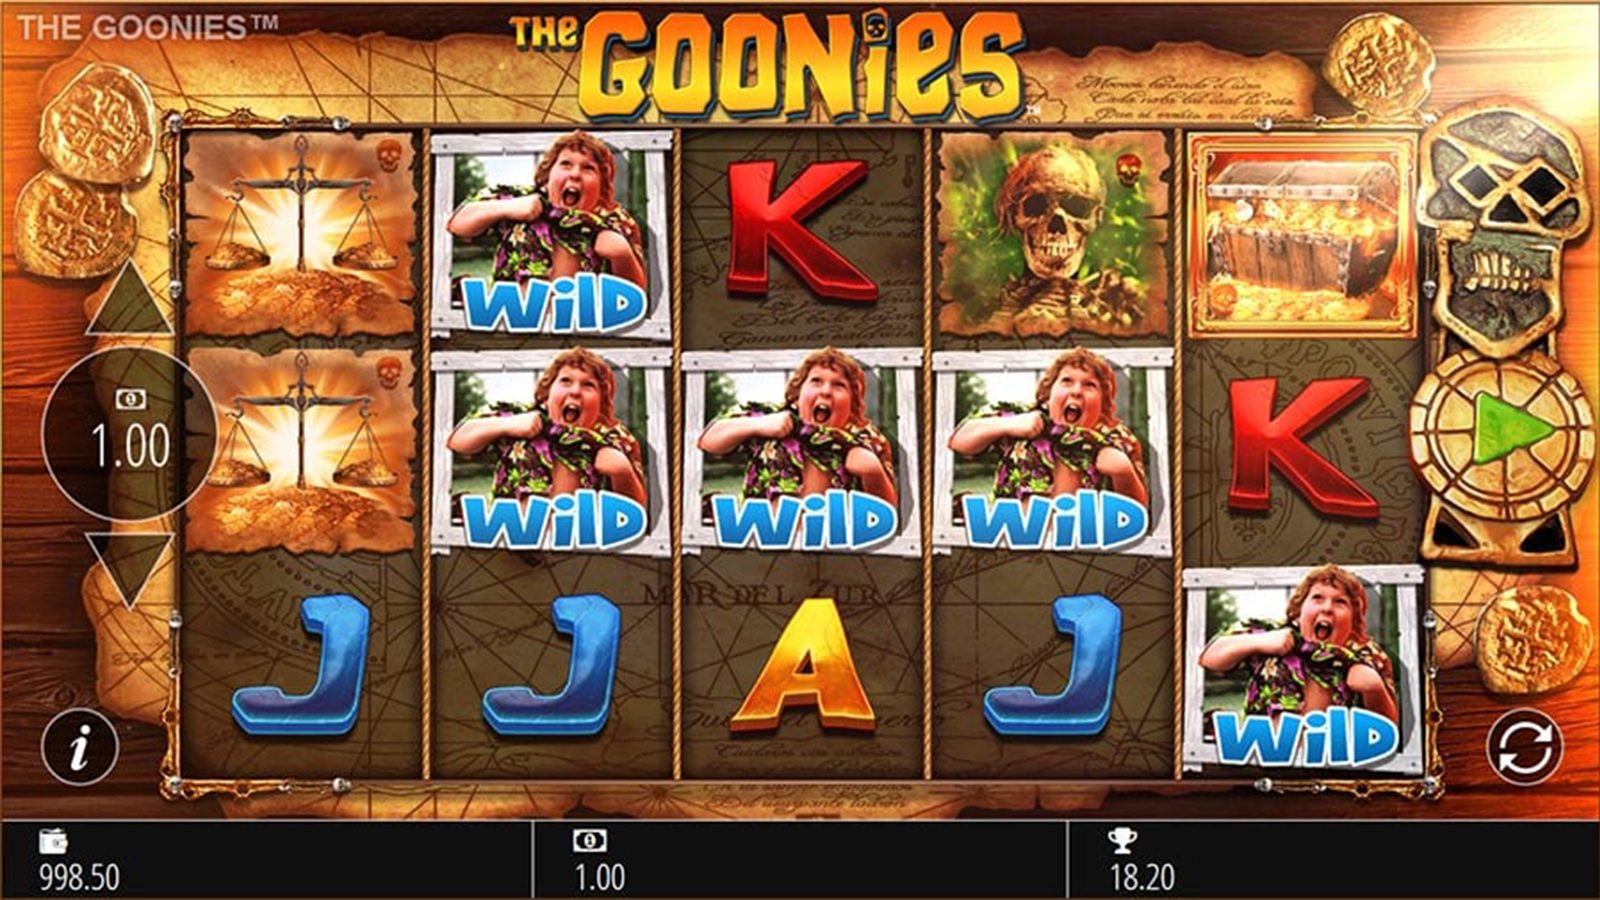 Blueprint Gaming - The Goonies Slot Review